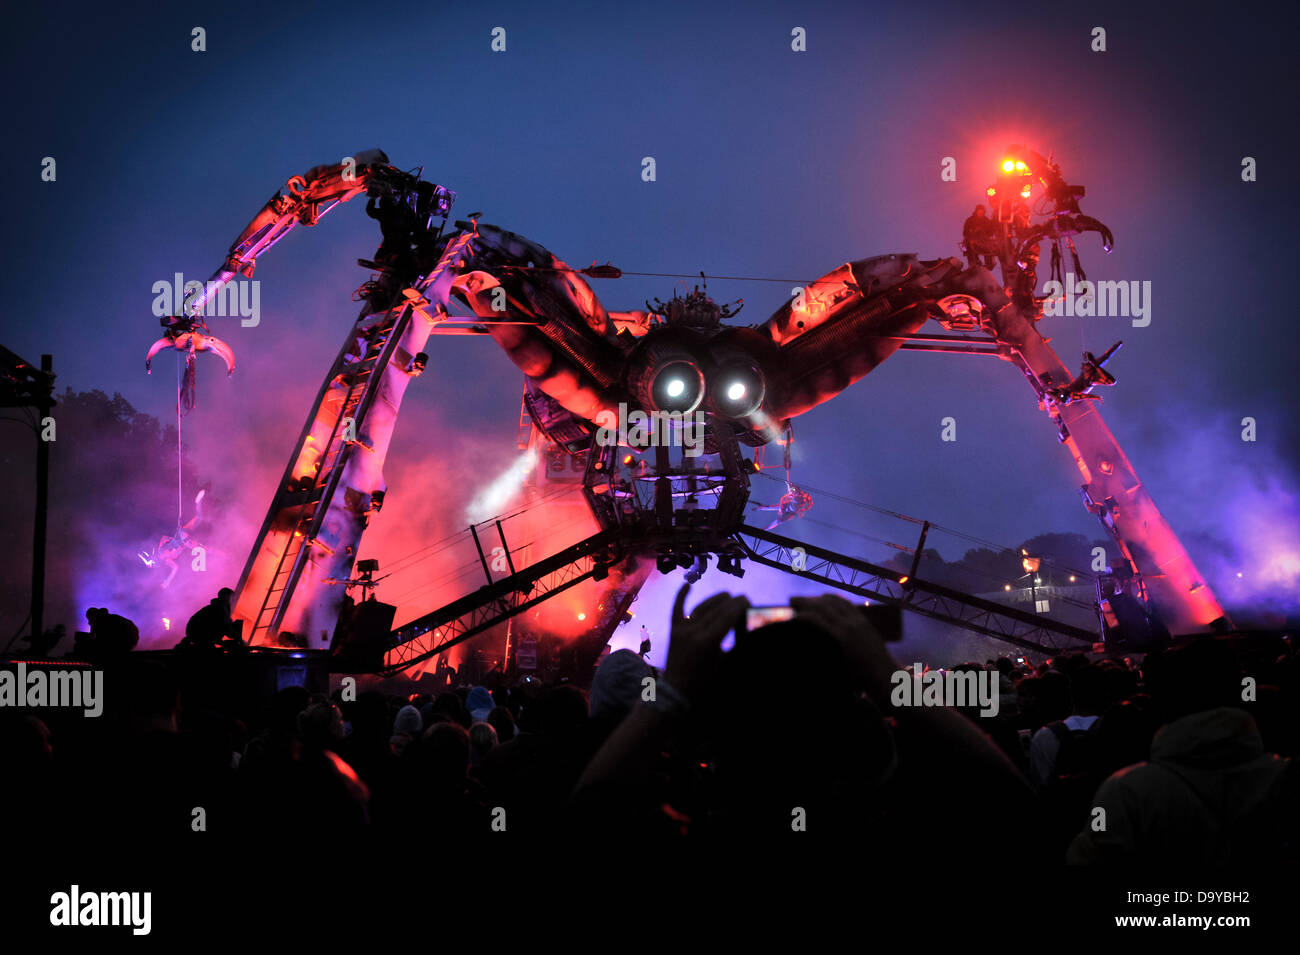 Glastonbury, UK. 28th June 2013. GLASTONBURY MUSIC FESTIVAL UK  2013 Festival goers watch a performance of Arcadia, a giant spider consisting of flames and lasers in tune to bass-pounding music DJs at the arts and music festival. GLASTONBURY MUSIC FESTIVAL PILTON, SOMERSET, ENGLAND, UK Credit:  Alistair Heap/Alamy Live News Stock Photo